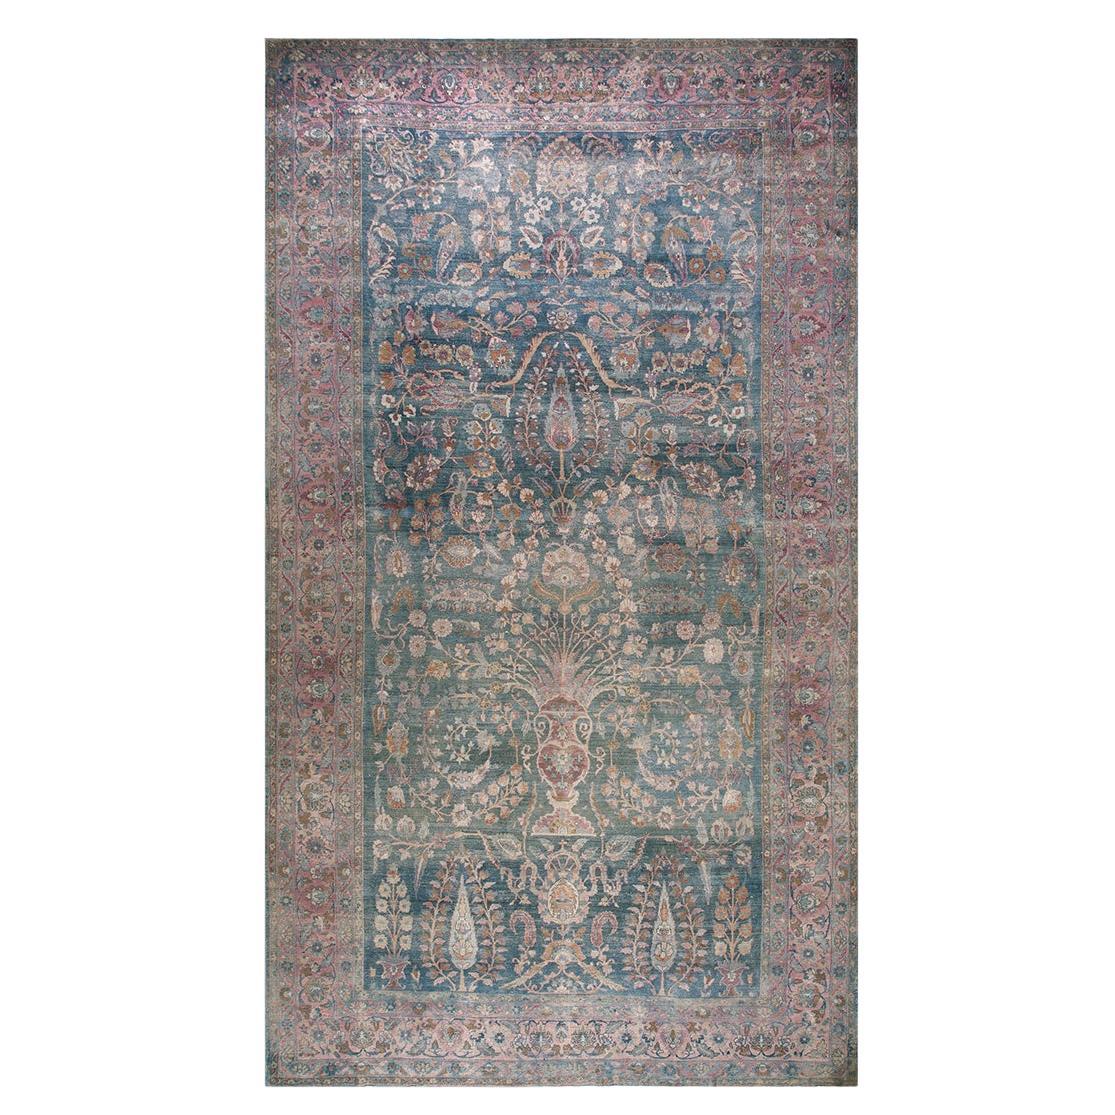 Early 20th Century N.E. Persian Khorassan Moud Carpet (10' x 18'4" - 305 x 560) For Sale